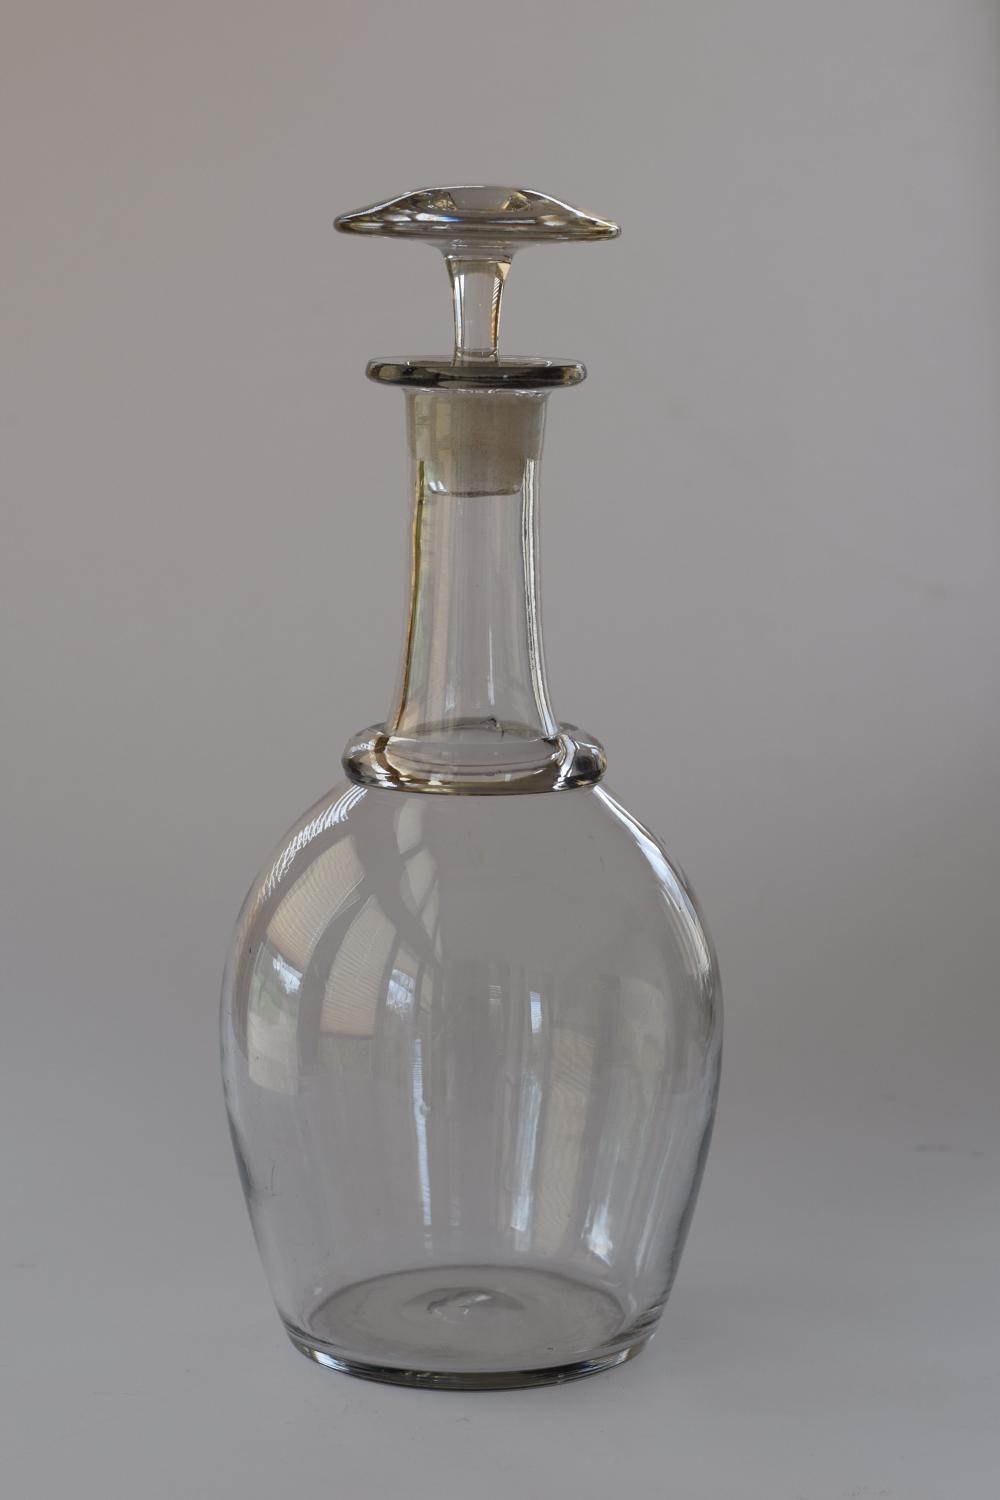 French cider decanter with stopper